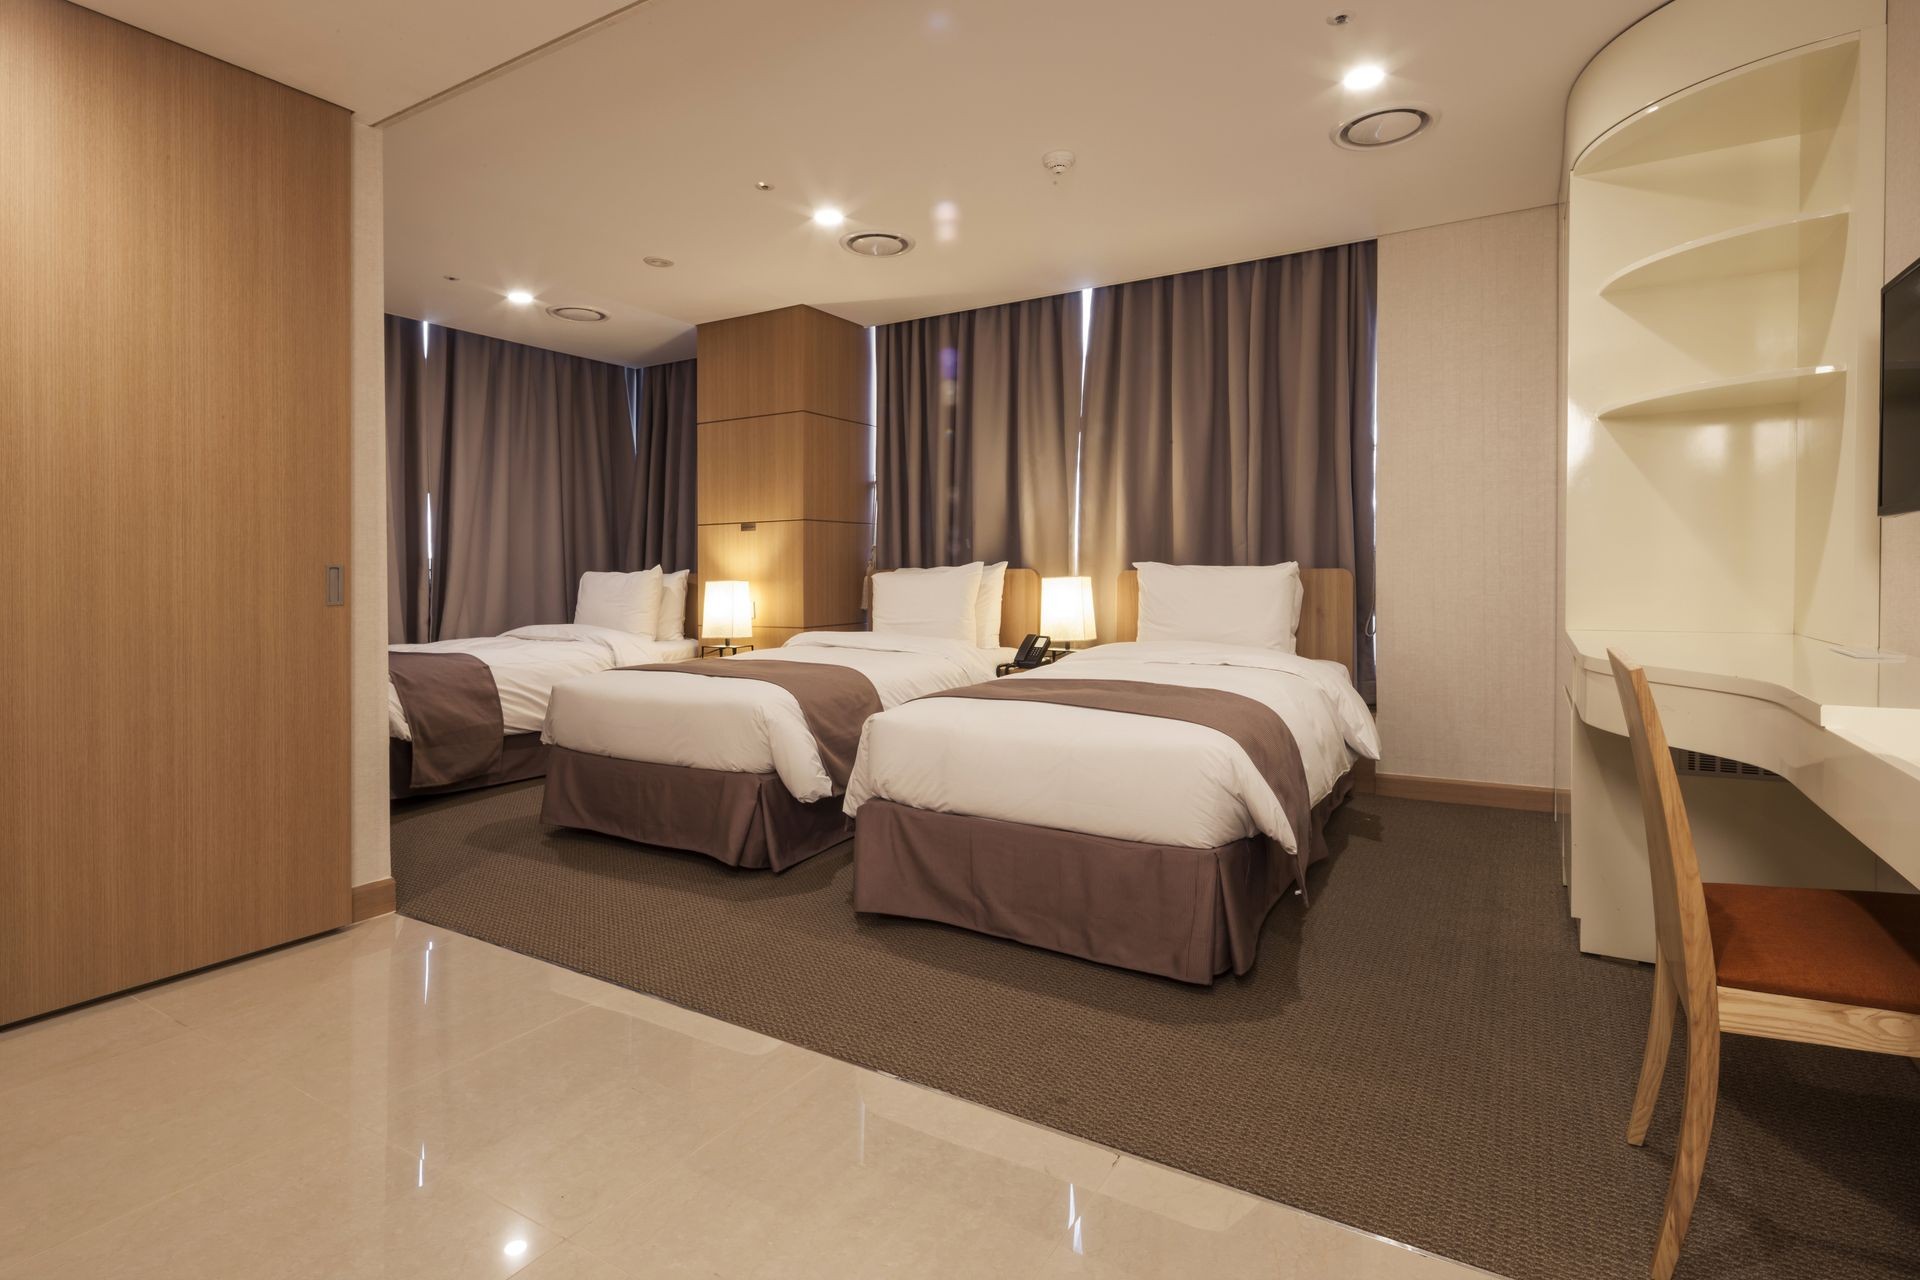 A business hotel room with triple bed, curtain, table, chair, blanket, window in seoul, korea.